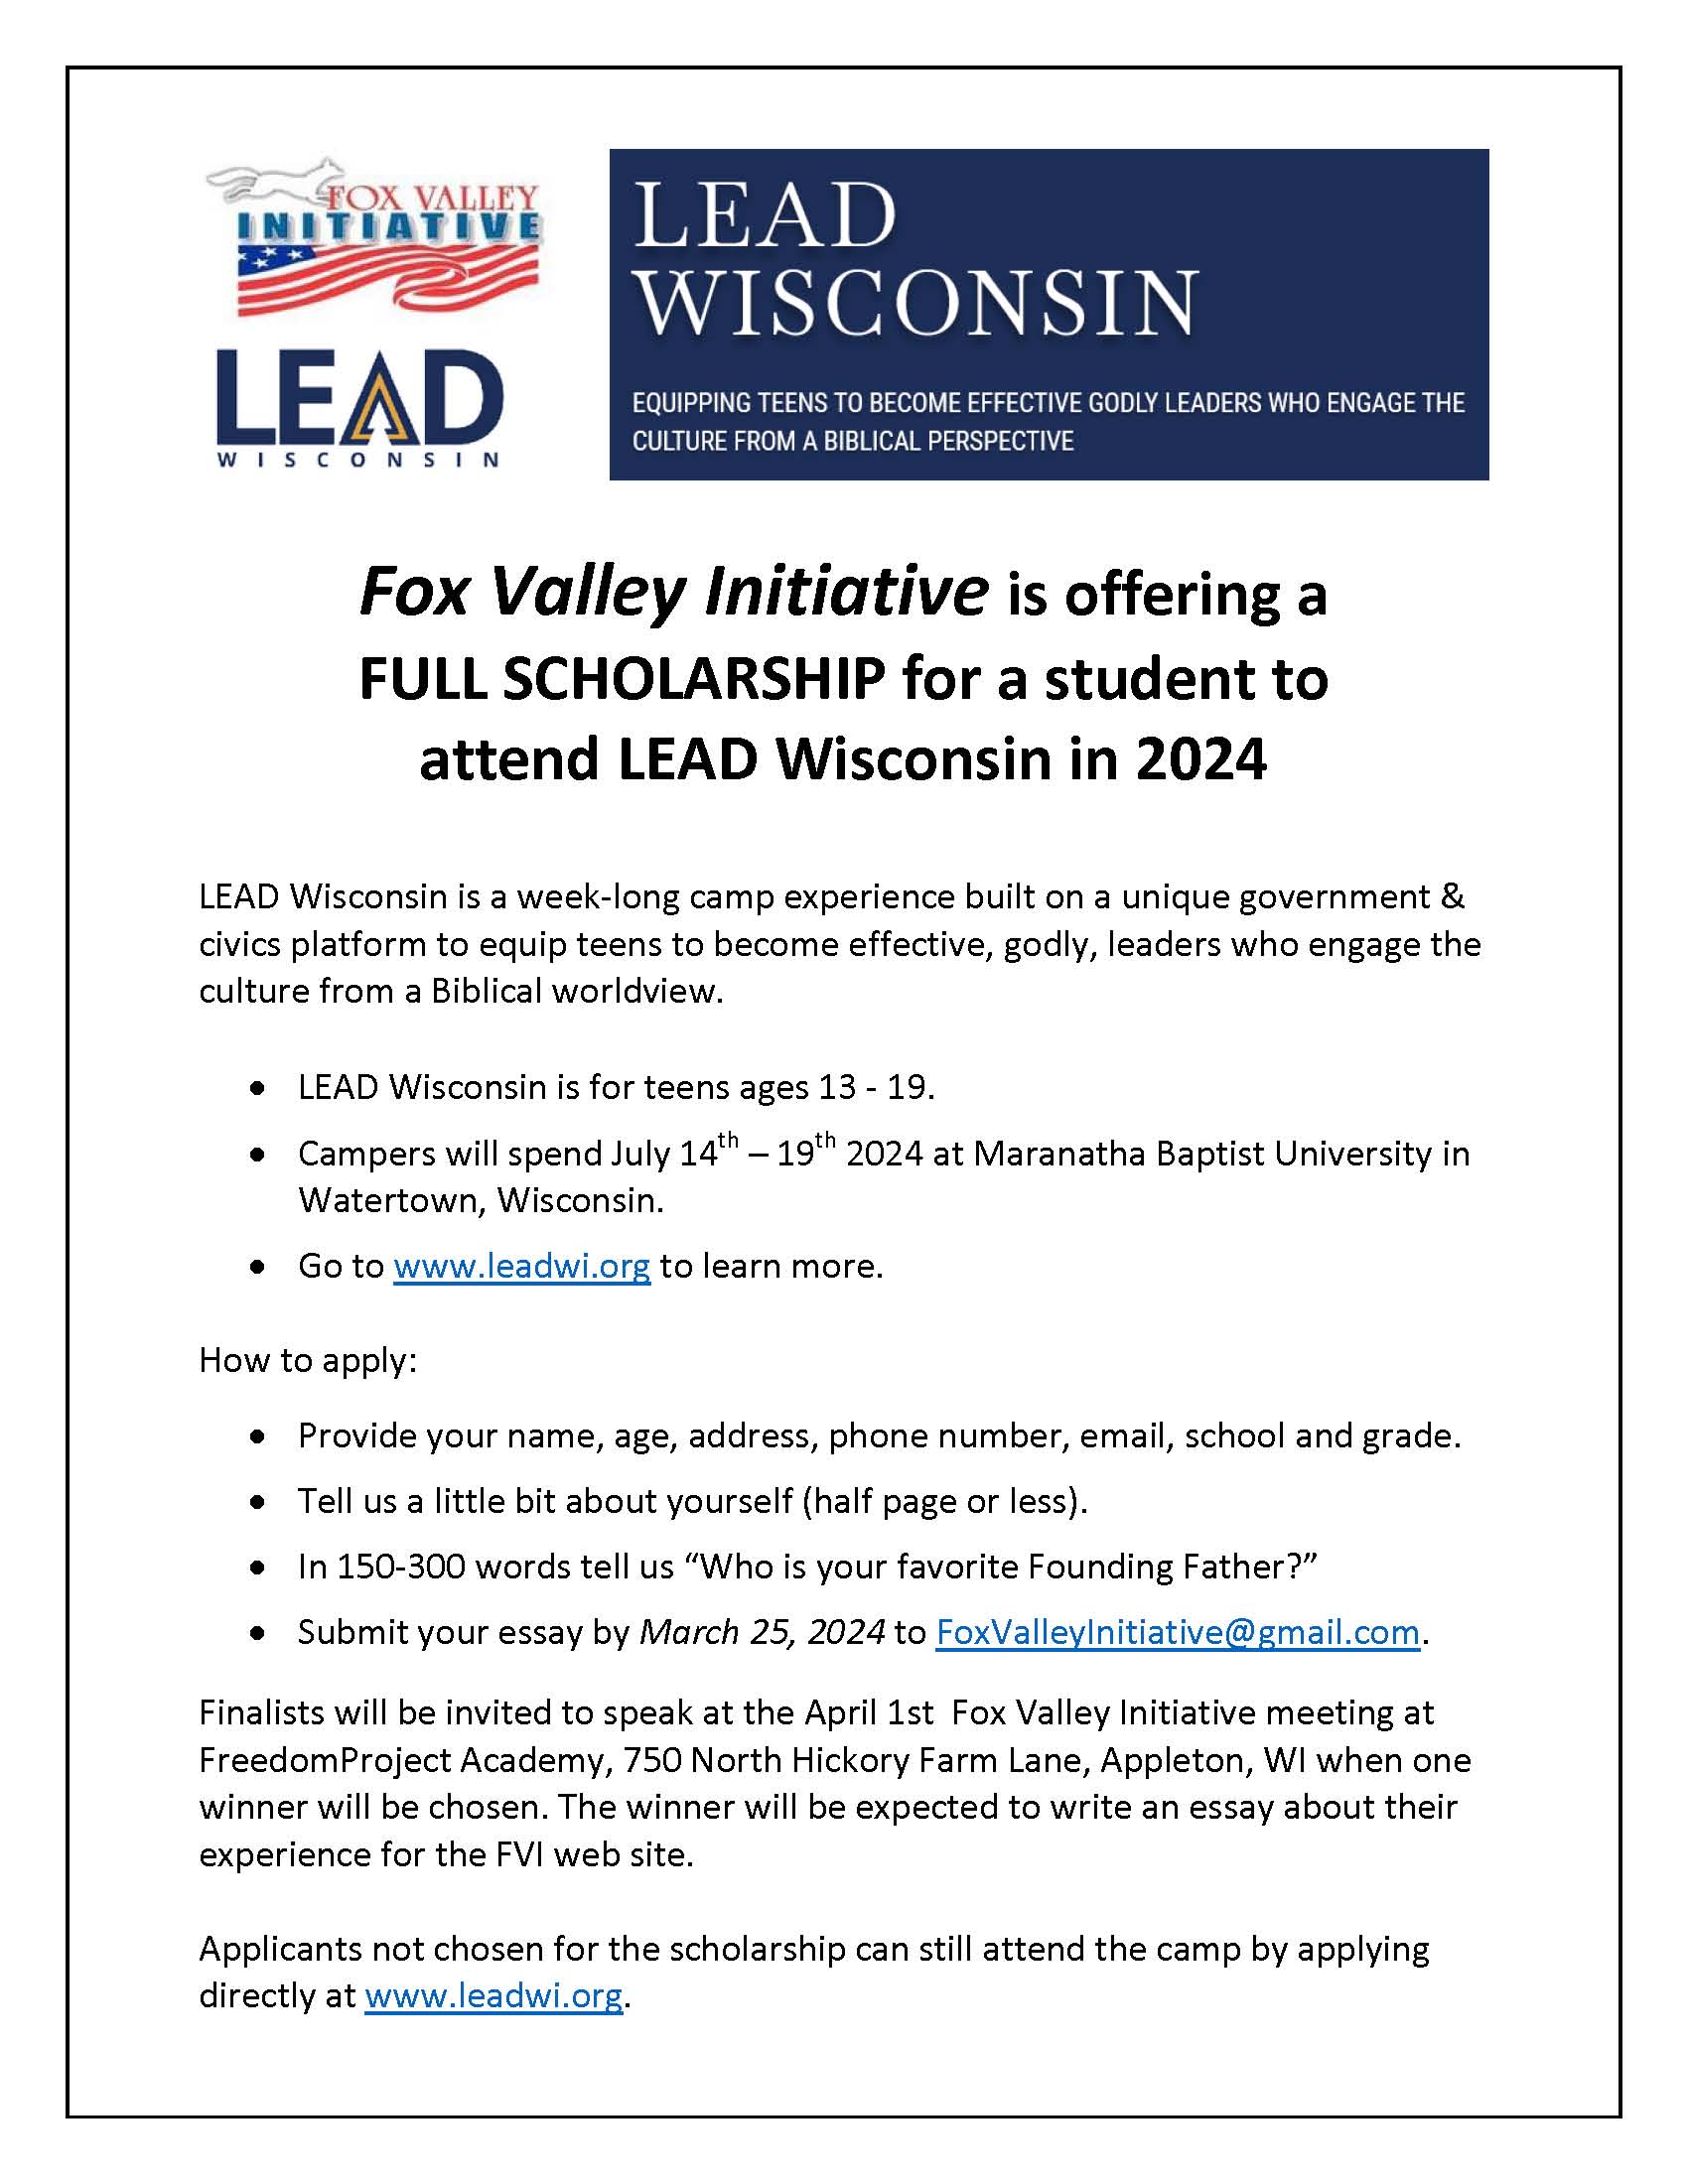 Fox Valley Initiative is offering a scholarship to attend LEAD Wisconsin.